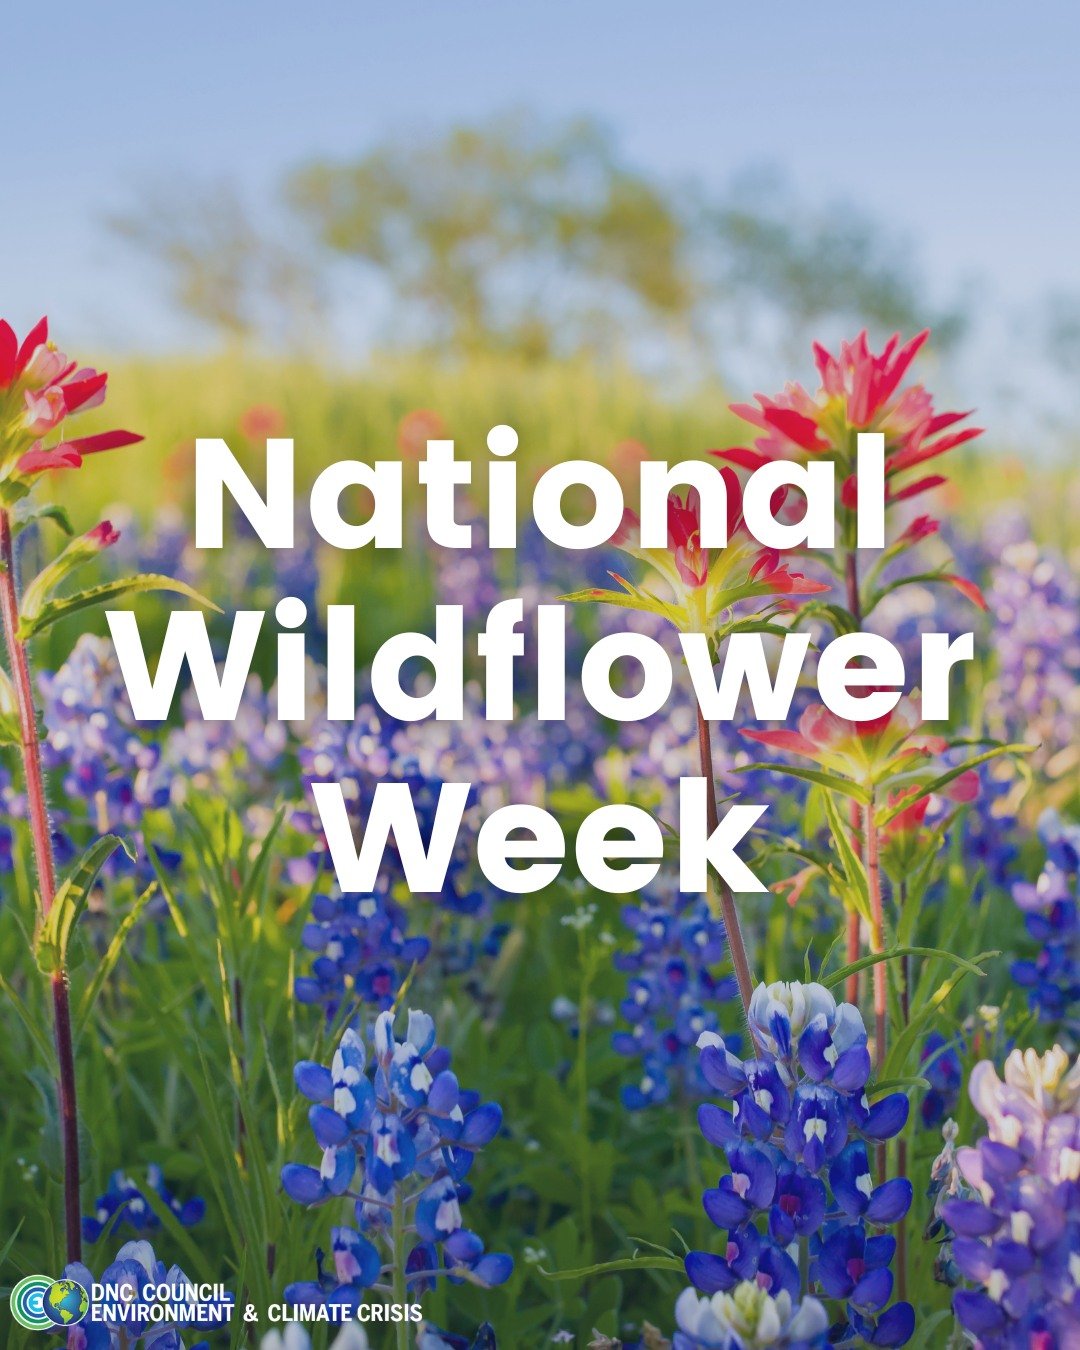 The first week of May is National Wildflower Week!🌺

Flowers feed pollinators, help our food grow, and so much more. Developing a closer connection with nature can help us appreciate and protect it.
.
.
.
.
#NationalWildflowerWeek
#WildflowerWeek
#W